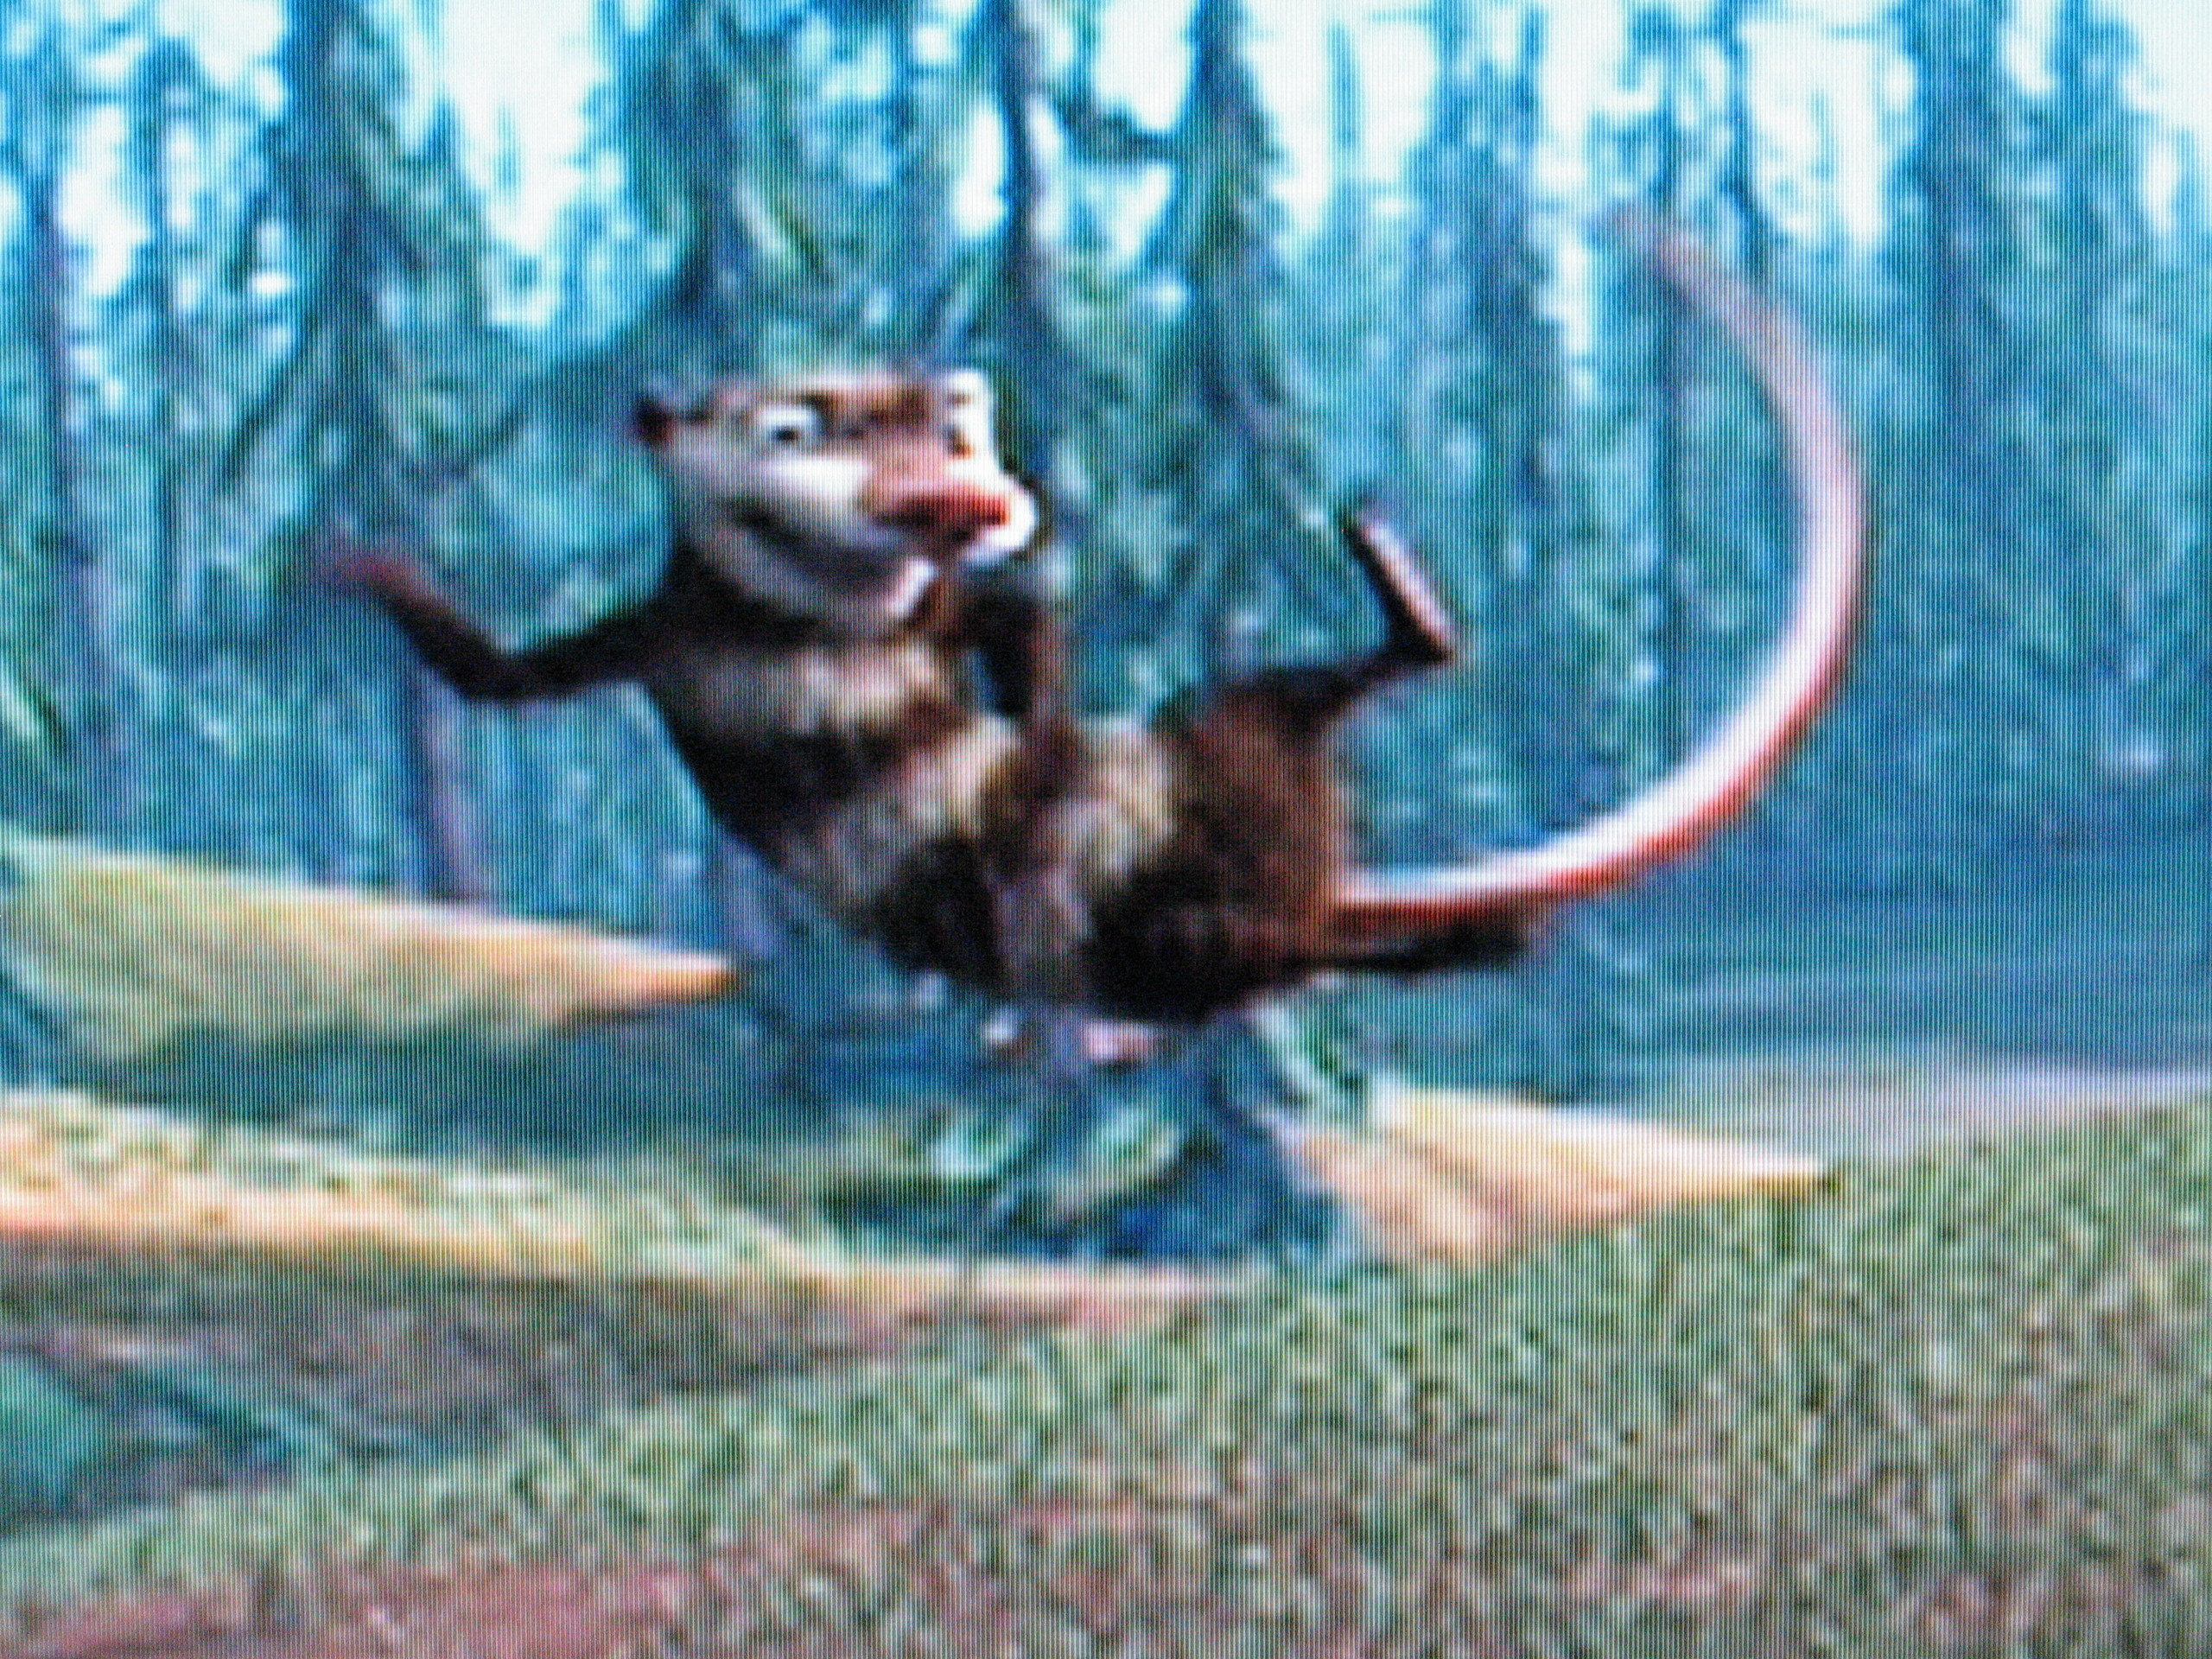 2560x1920 Ice Age: Eddie images "Miss me! Miss me! Now you have to kiss me!" HD  wallpaper and background photos